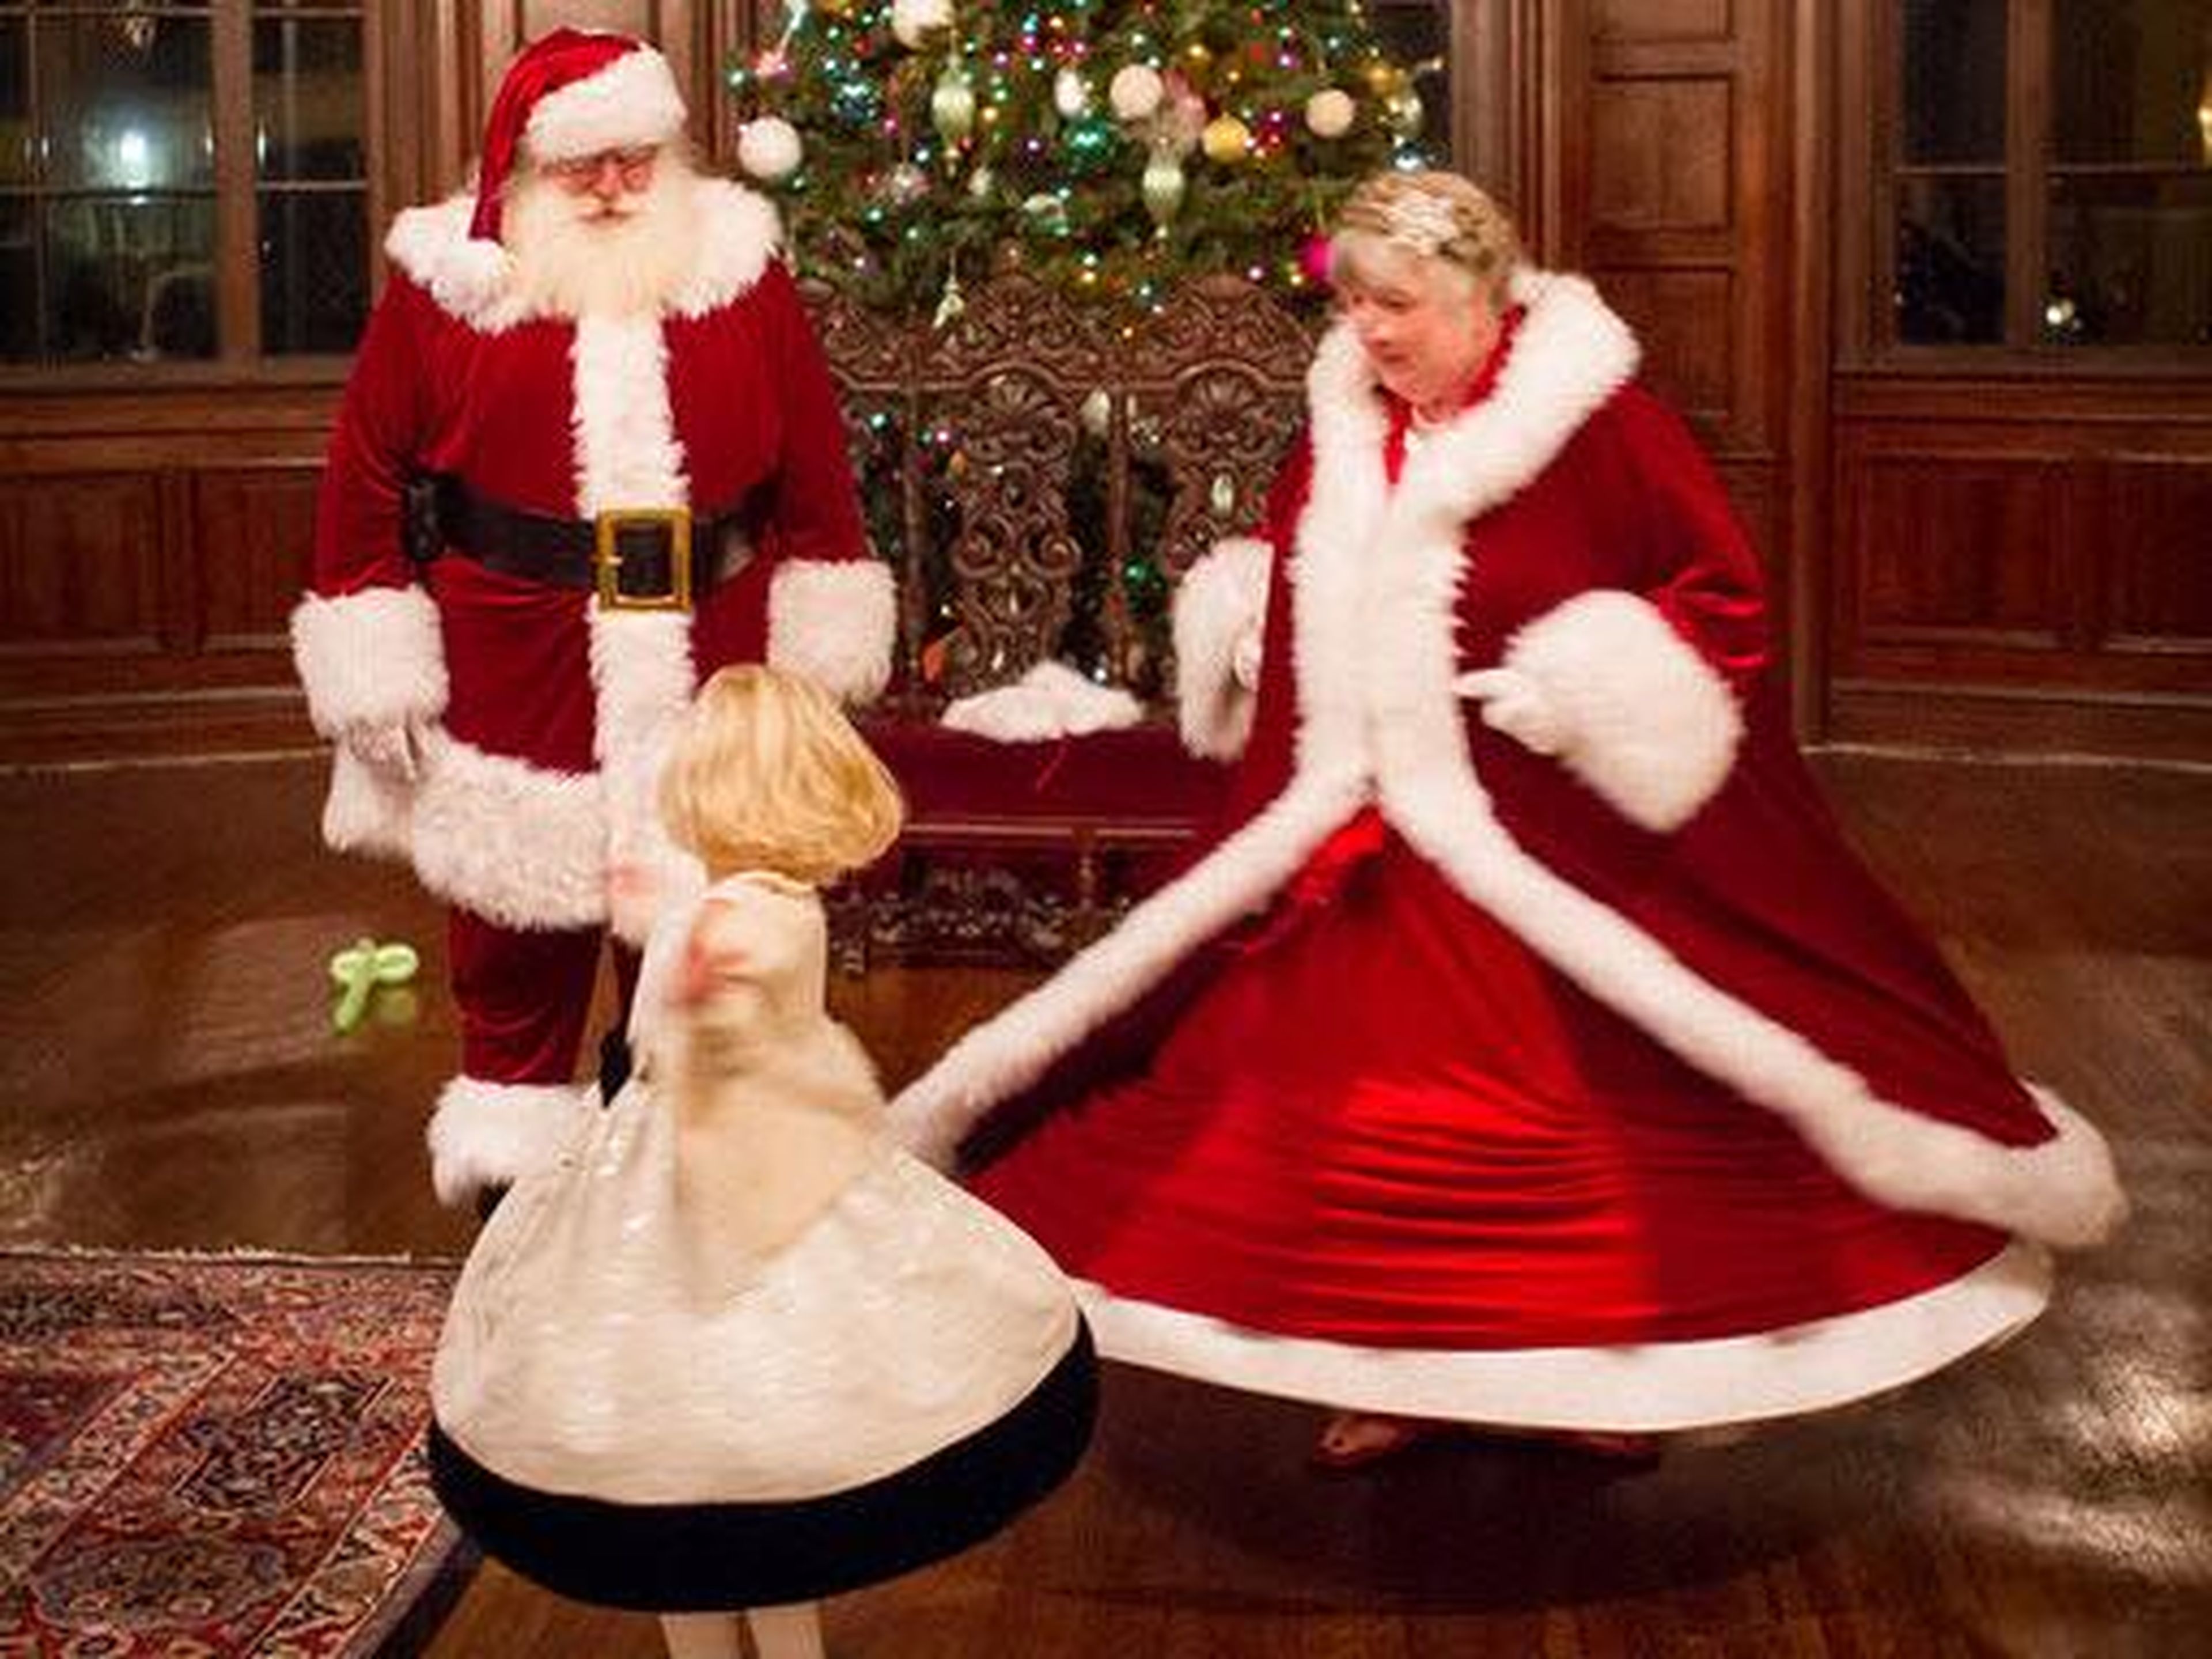 Ed with Mrs. Claus.